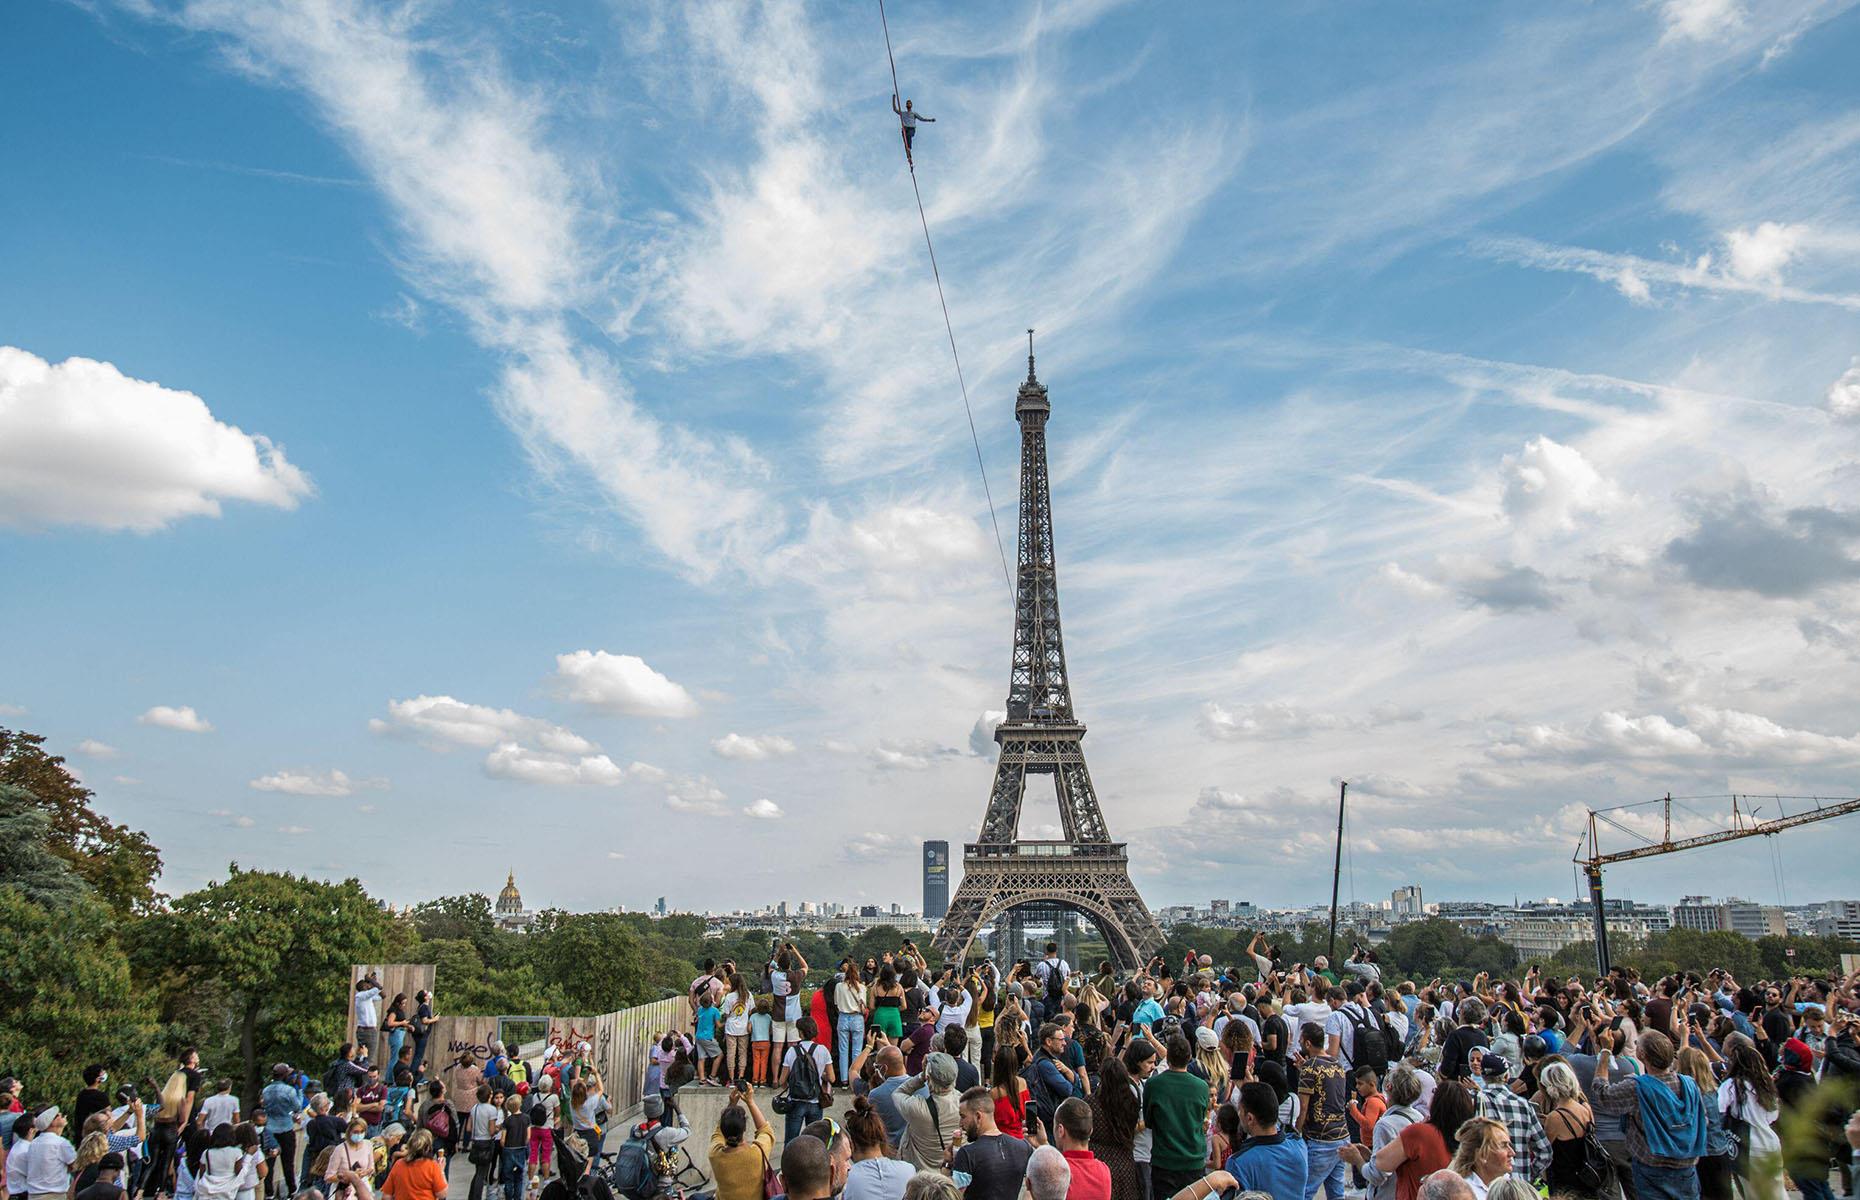 <p>On September 18, 2021, French tightrope walker Nathan Paulin thrilled crowds by traversing a 2,198-foot rope along a slackline between the first level of the Eiffel Tower and the Trocadero Square, 197 feet above the Seine. The 30-minute performance was part of the European Heritage Days festival held in the French capital that year.</p>